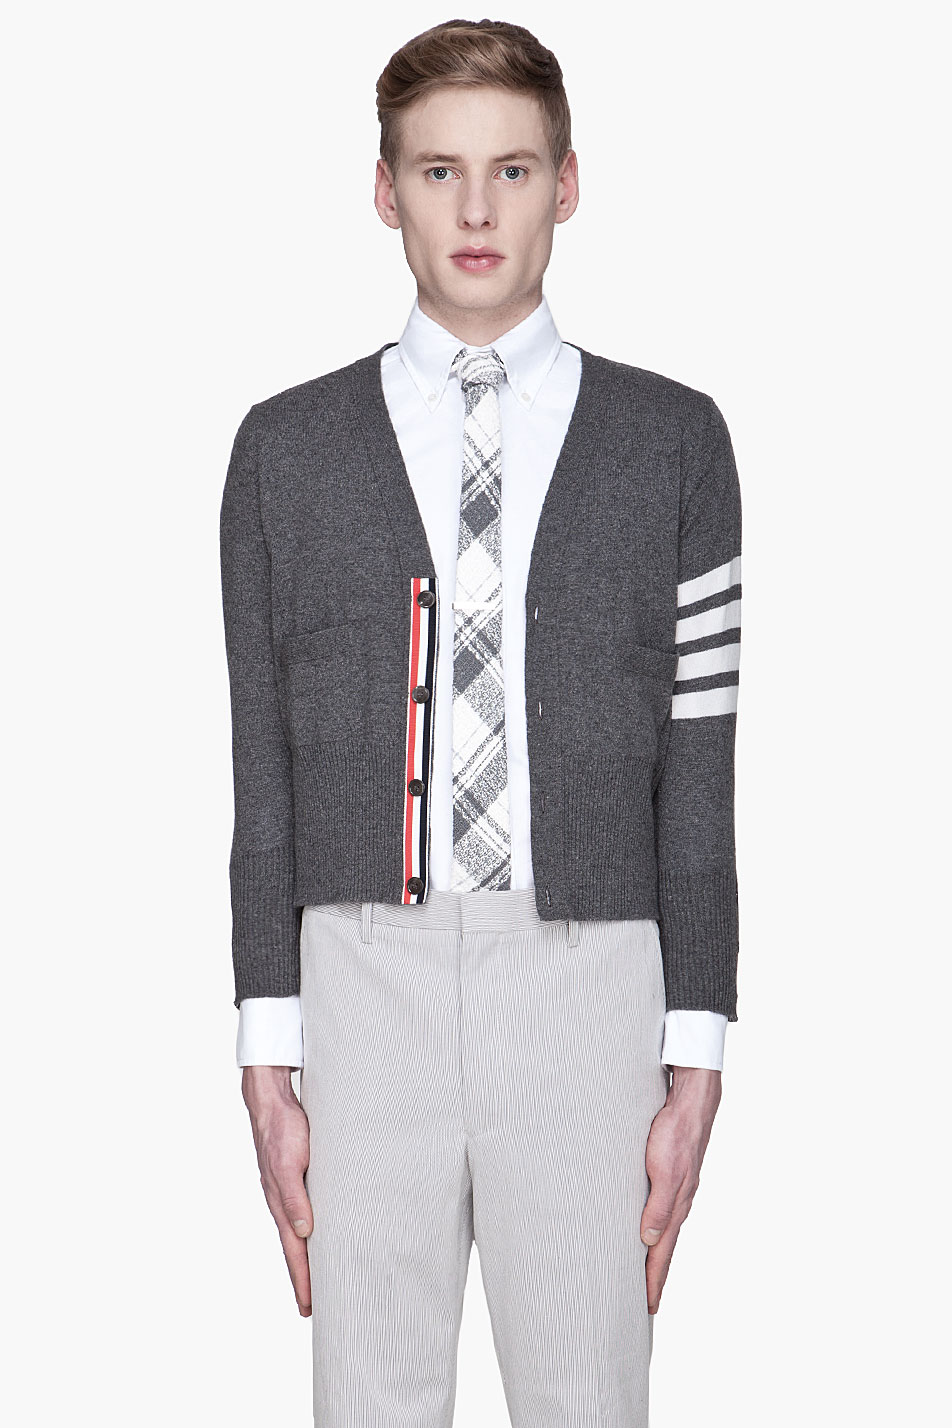 Lyst - Thom Browne Charcoal Grey Classic Cashmere Cardigan in Gray for Men